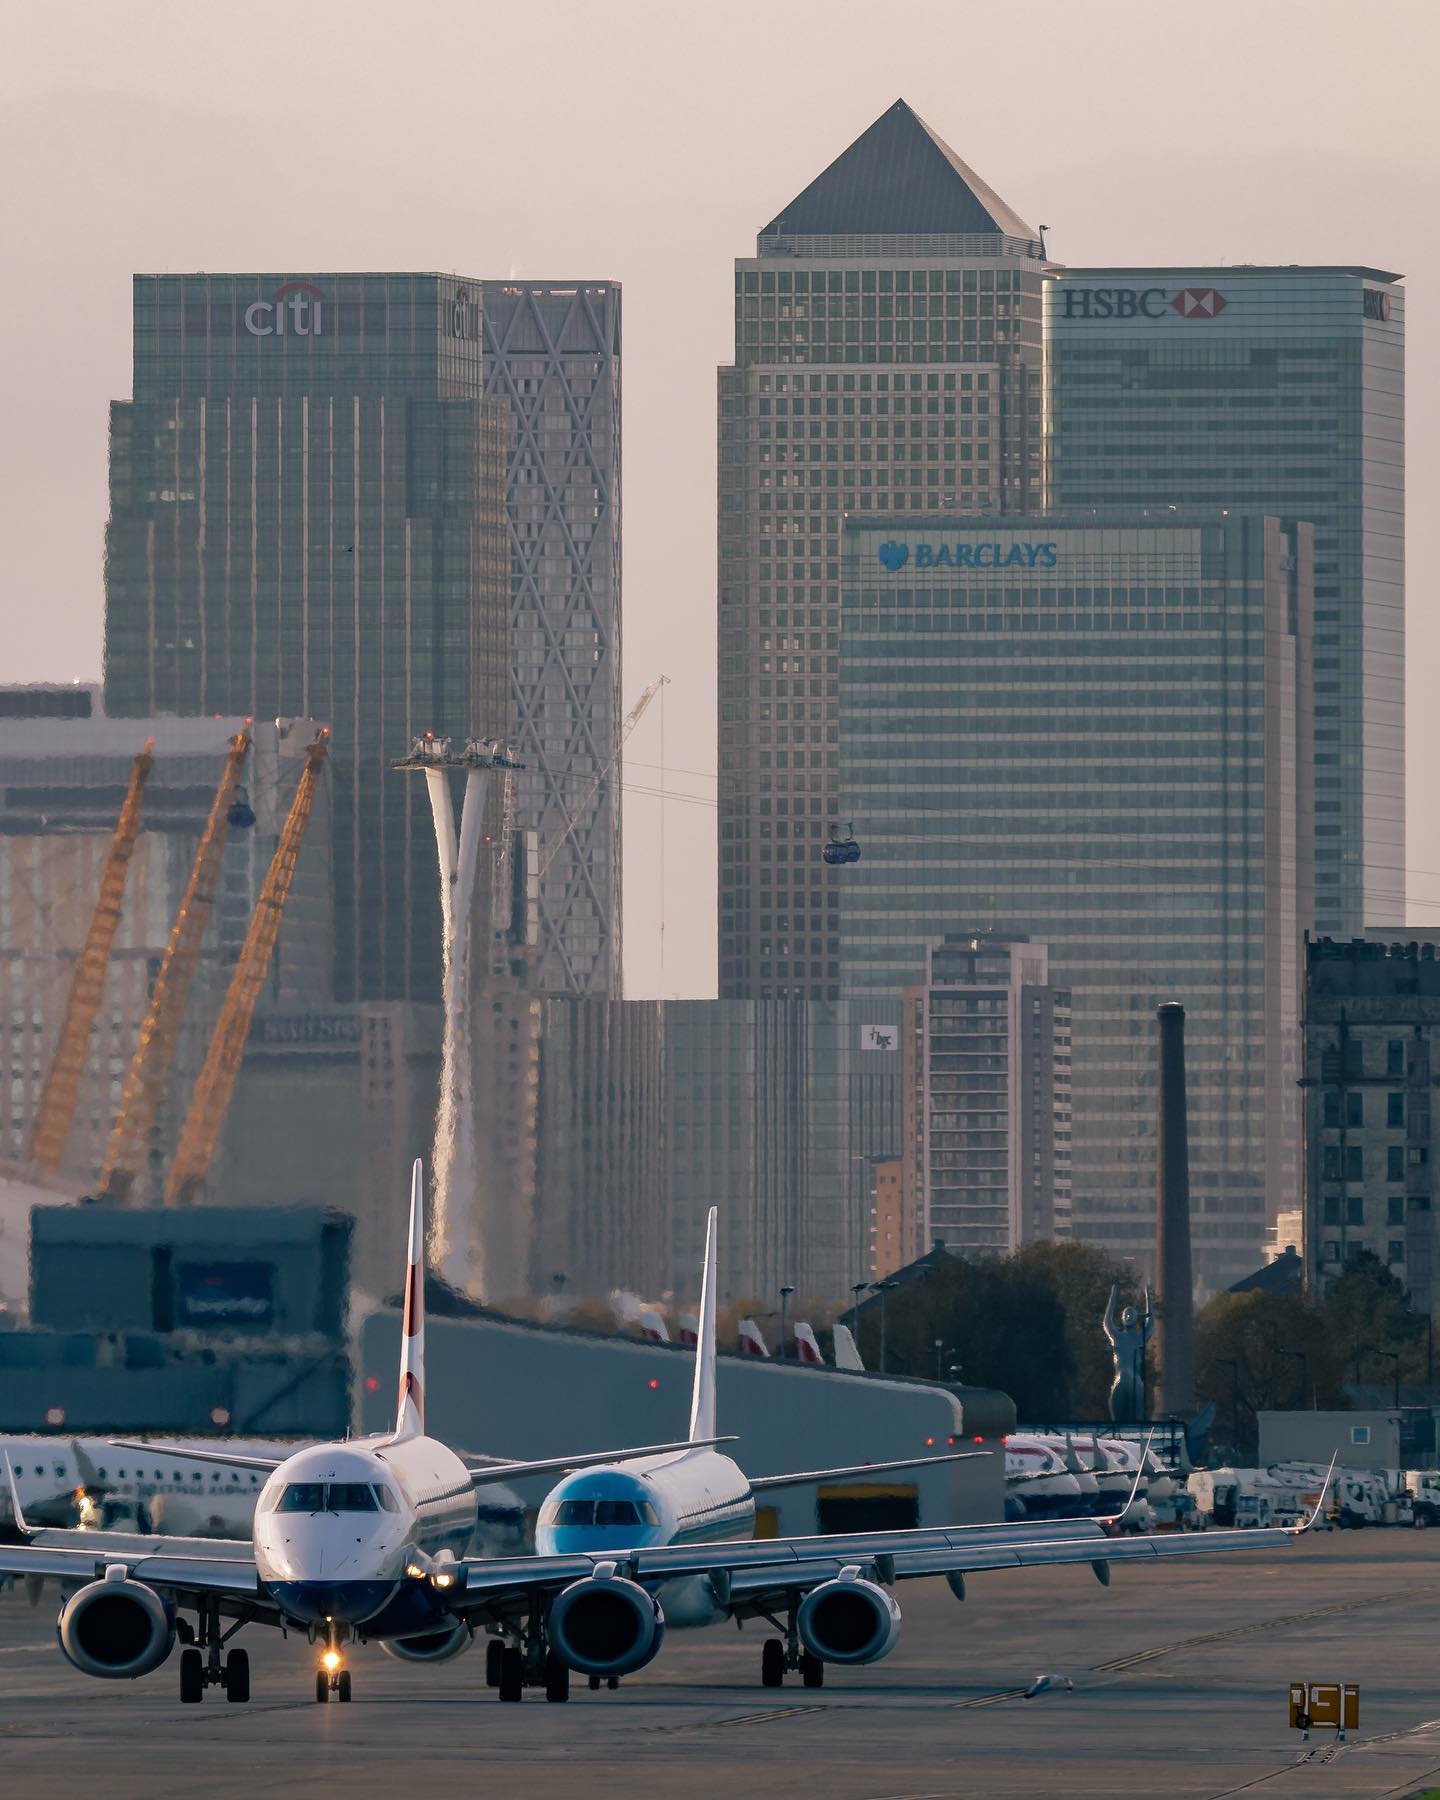 Signature Flight Support, London City Airport (LCY)